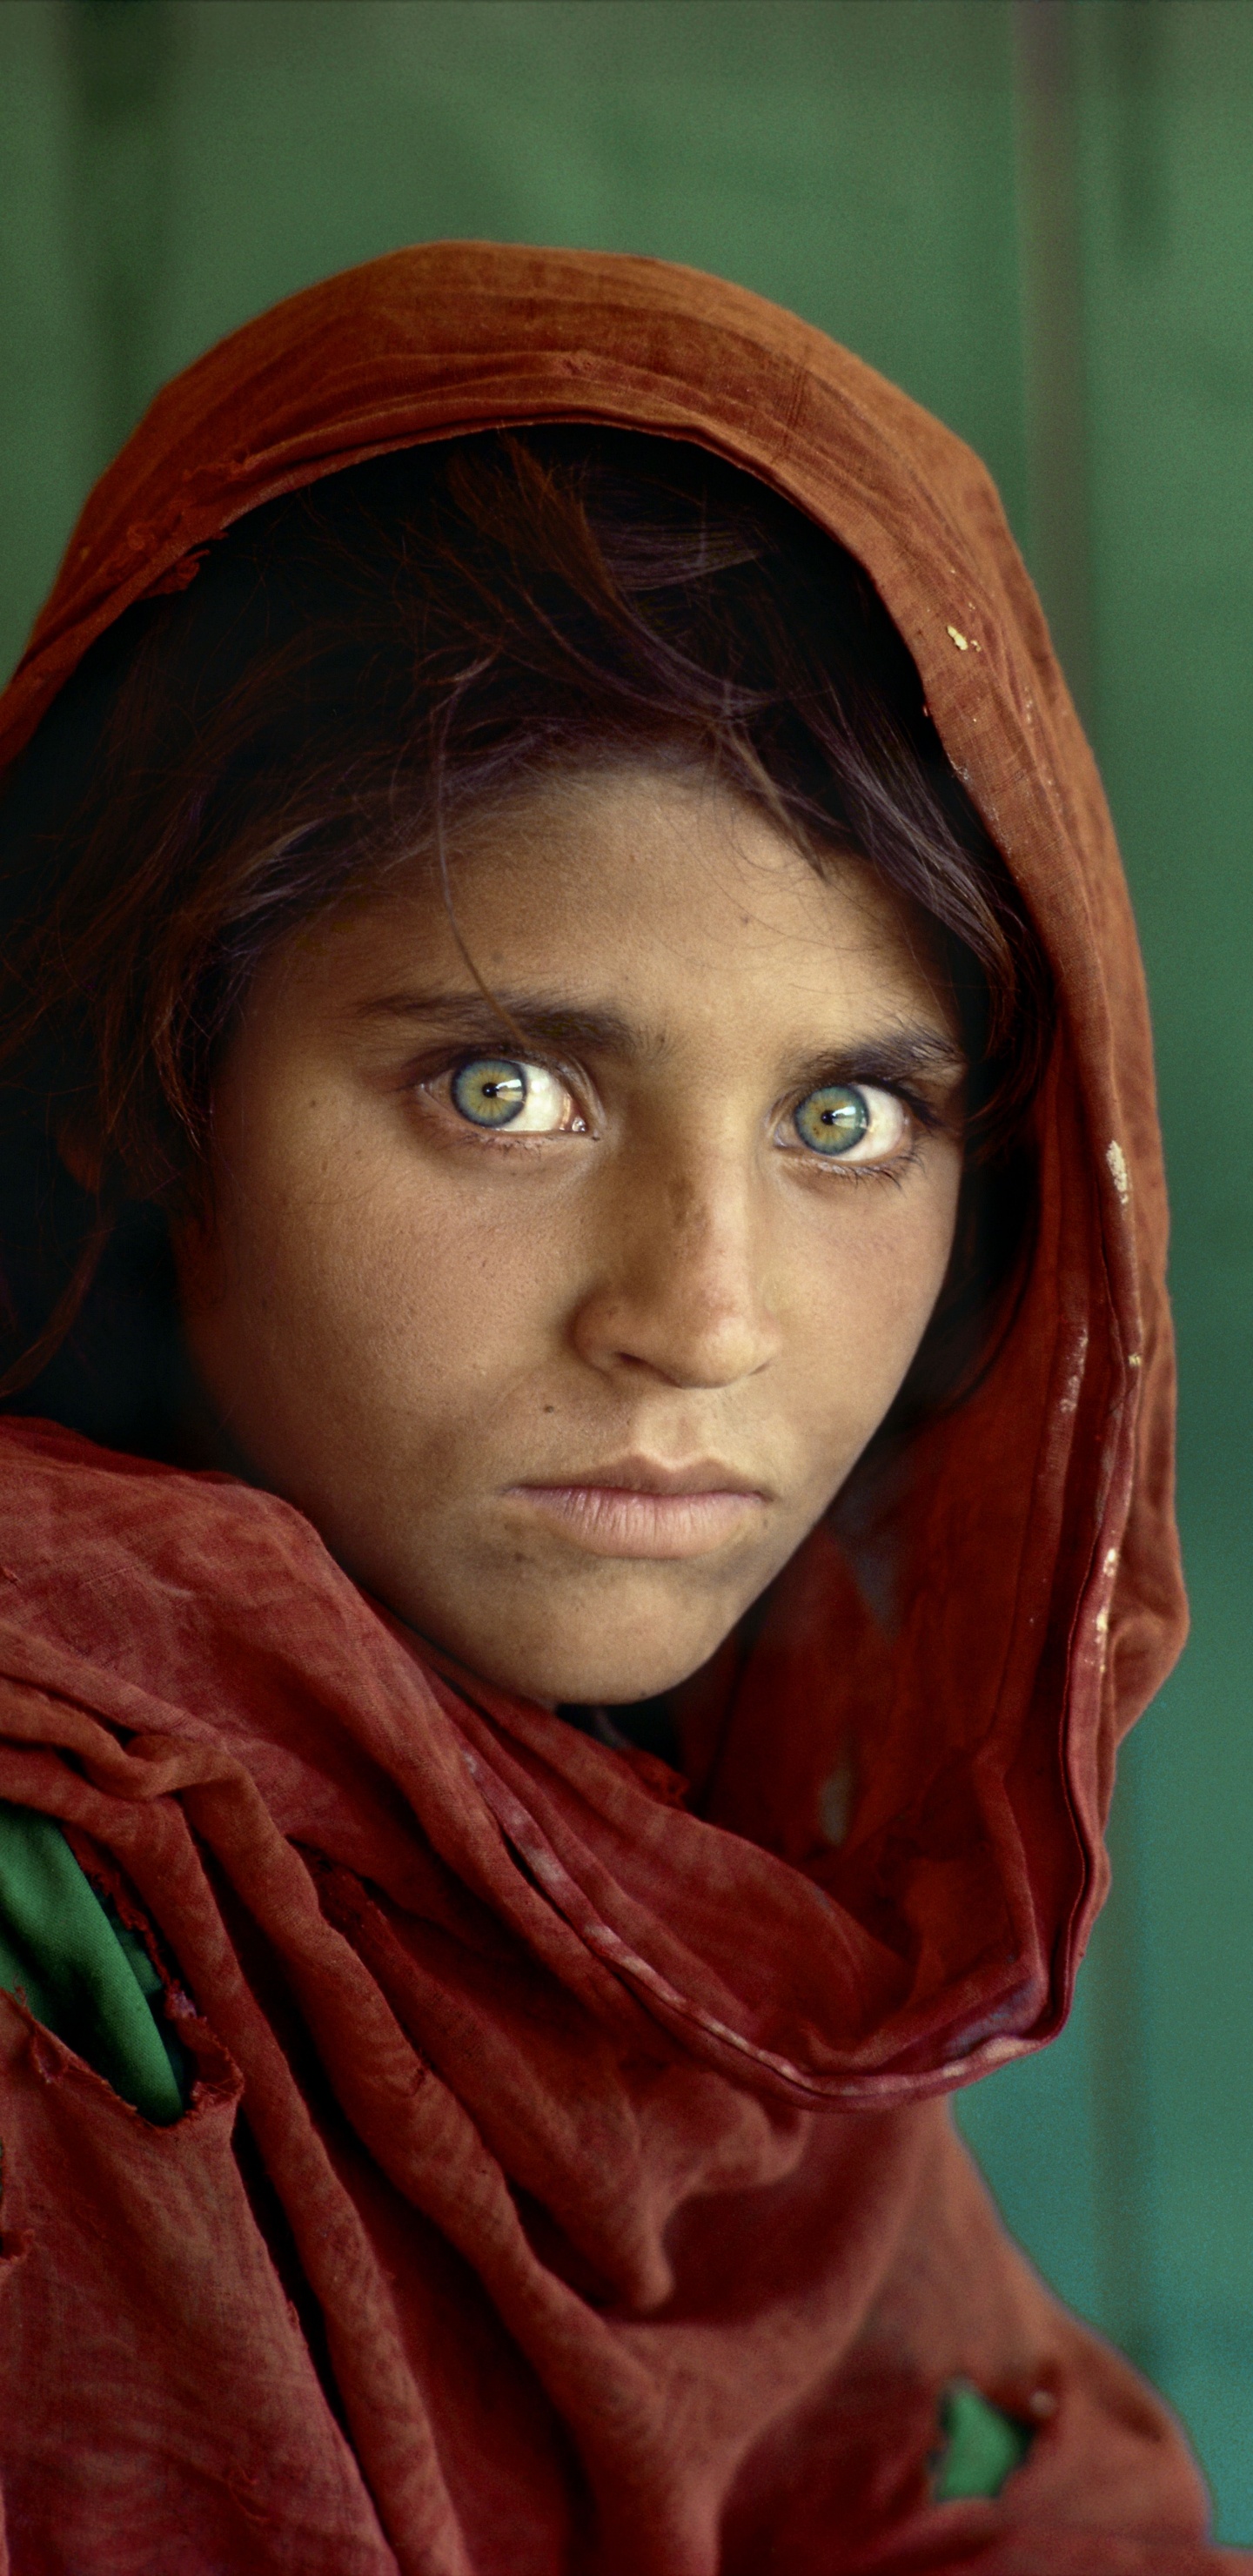 Fille Afghane, Afghanistan, National Geographic, Face, Front. Wallpaper in 1440x2960 Resolution